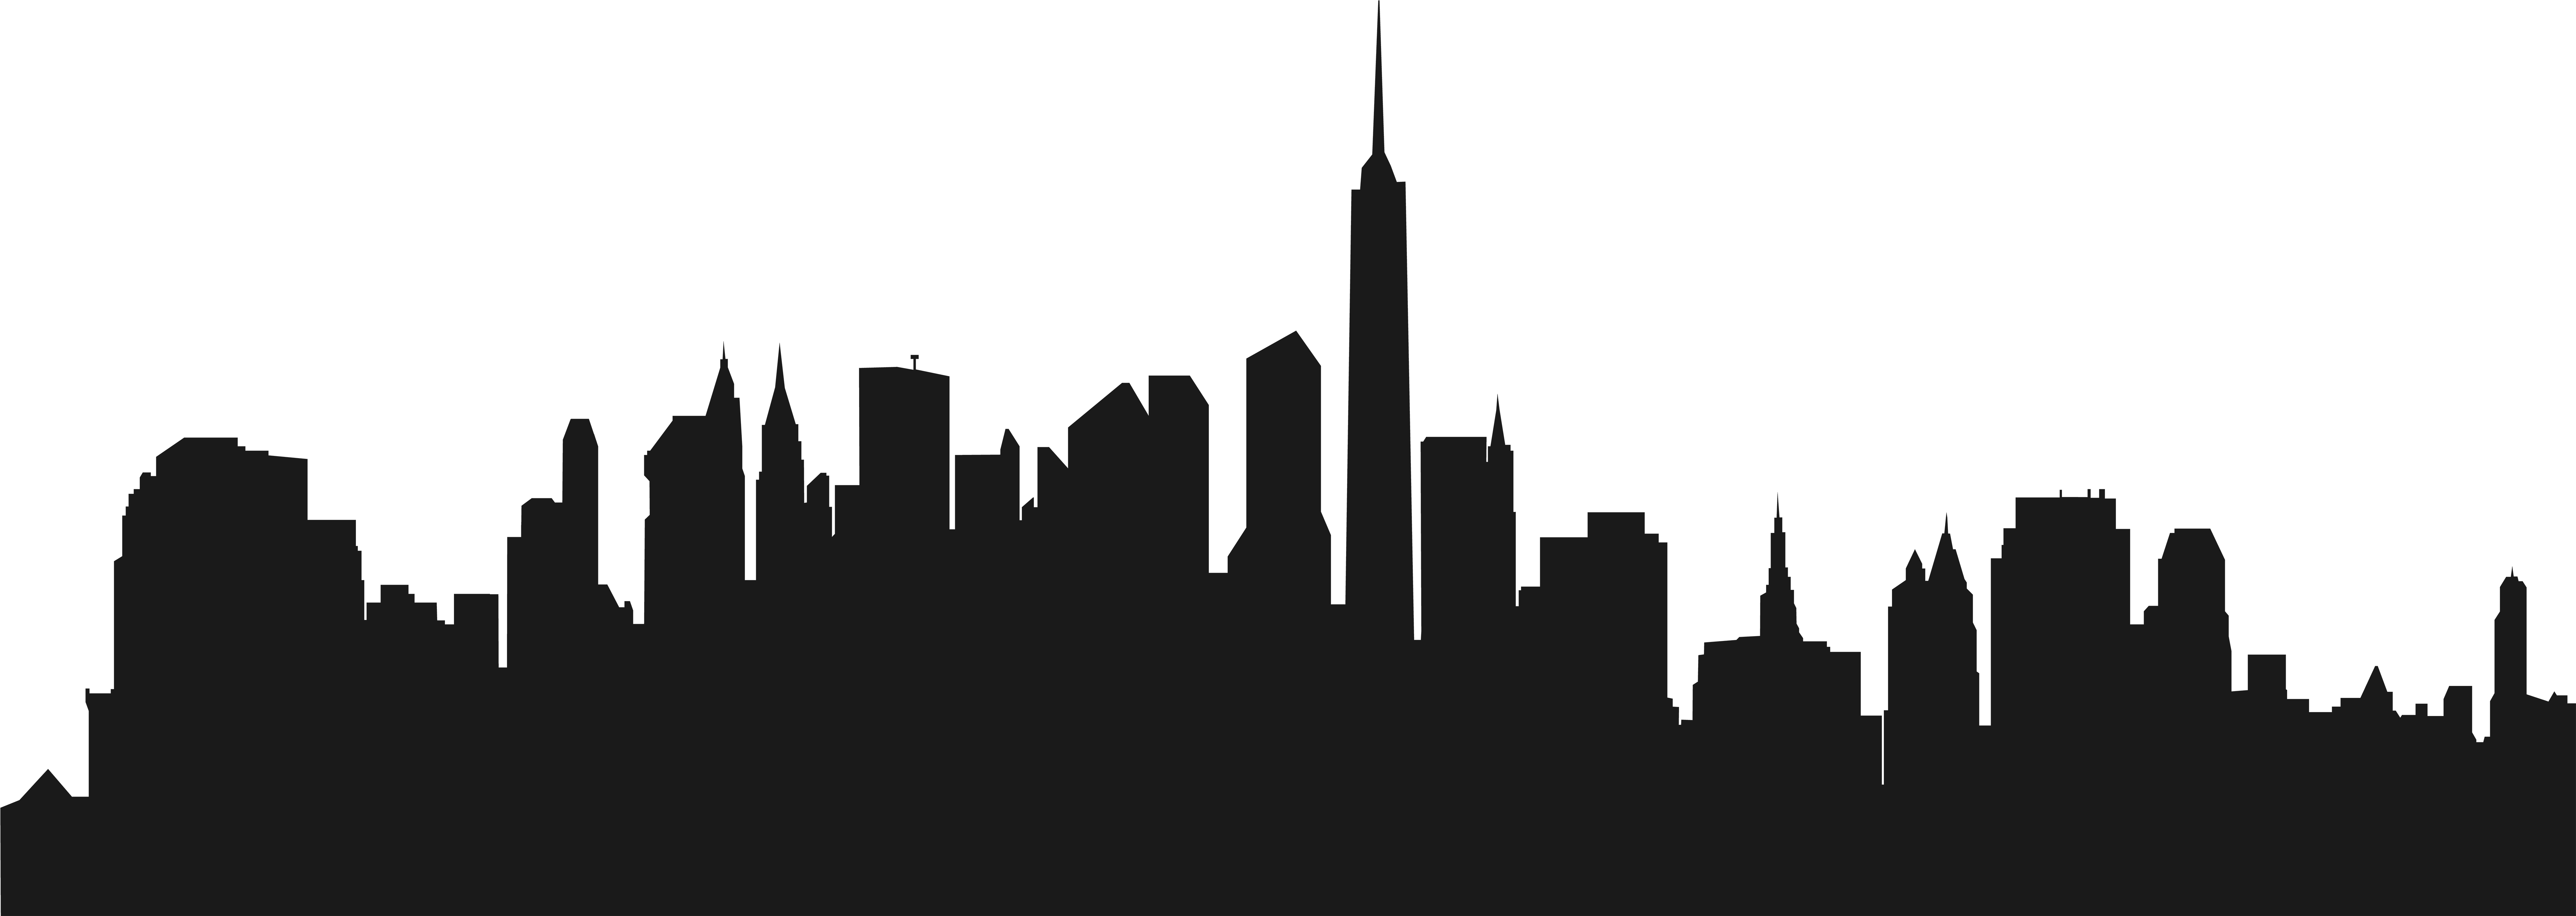 New York City Silhouette PNG Image